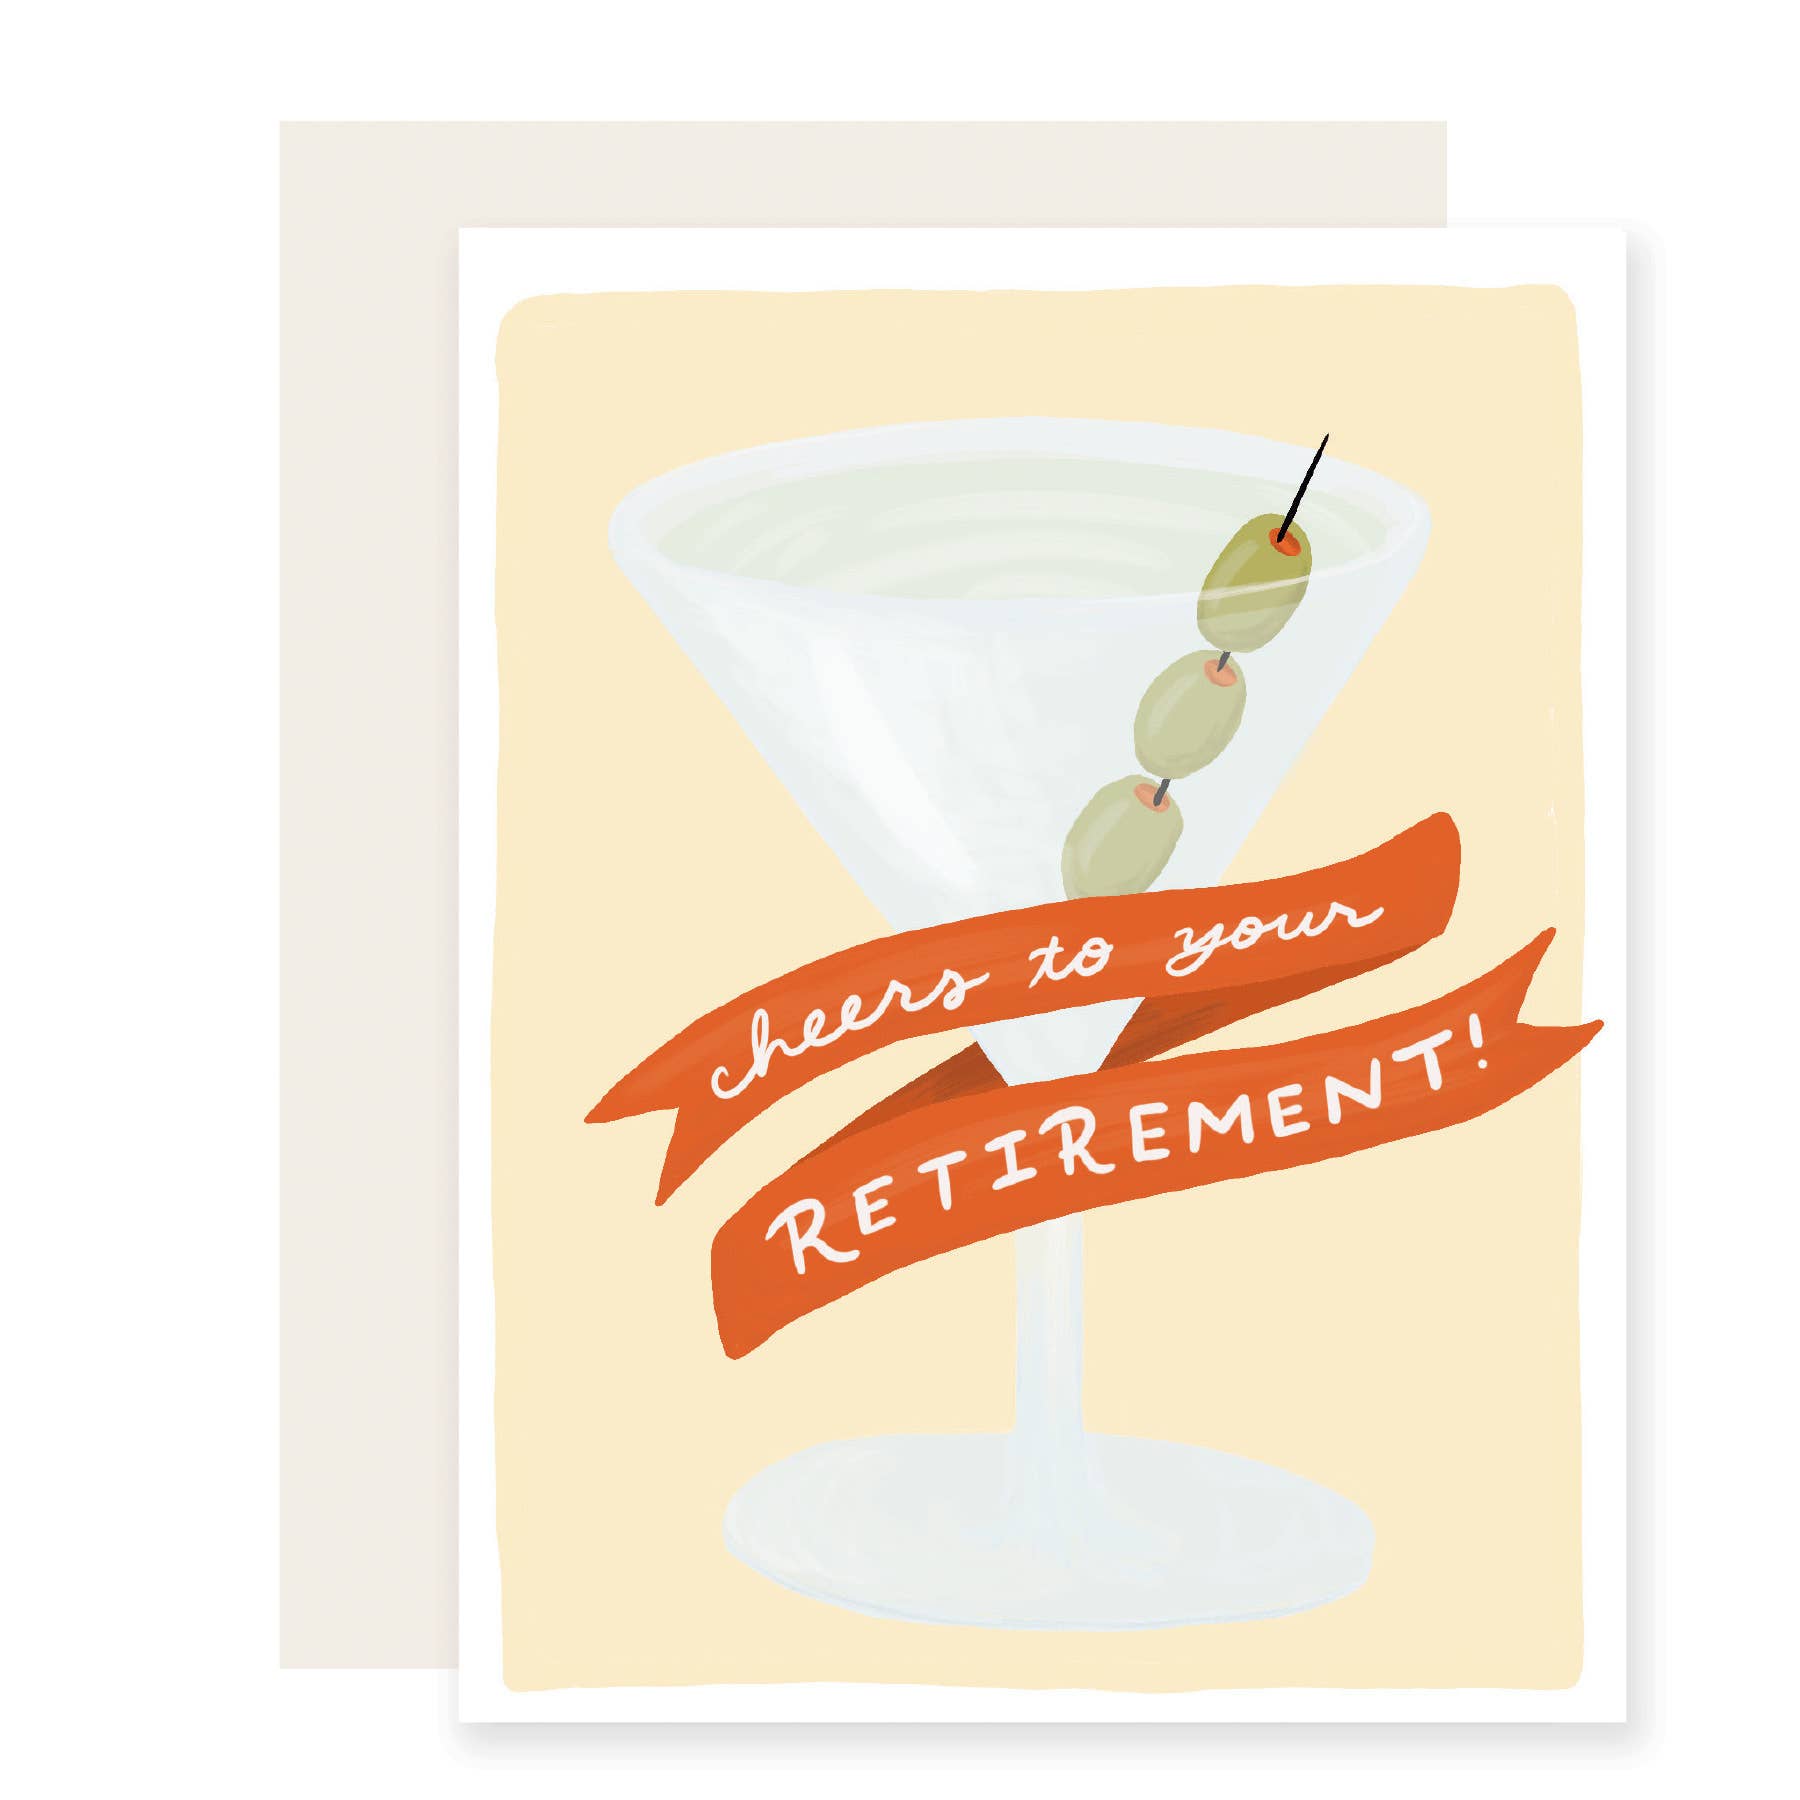 Retirement martini greeting card that reads "Cheers to your retirement!"